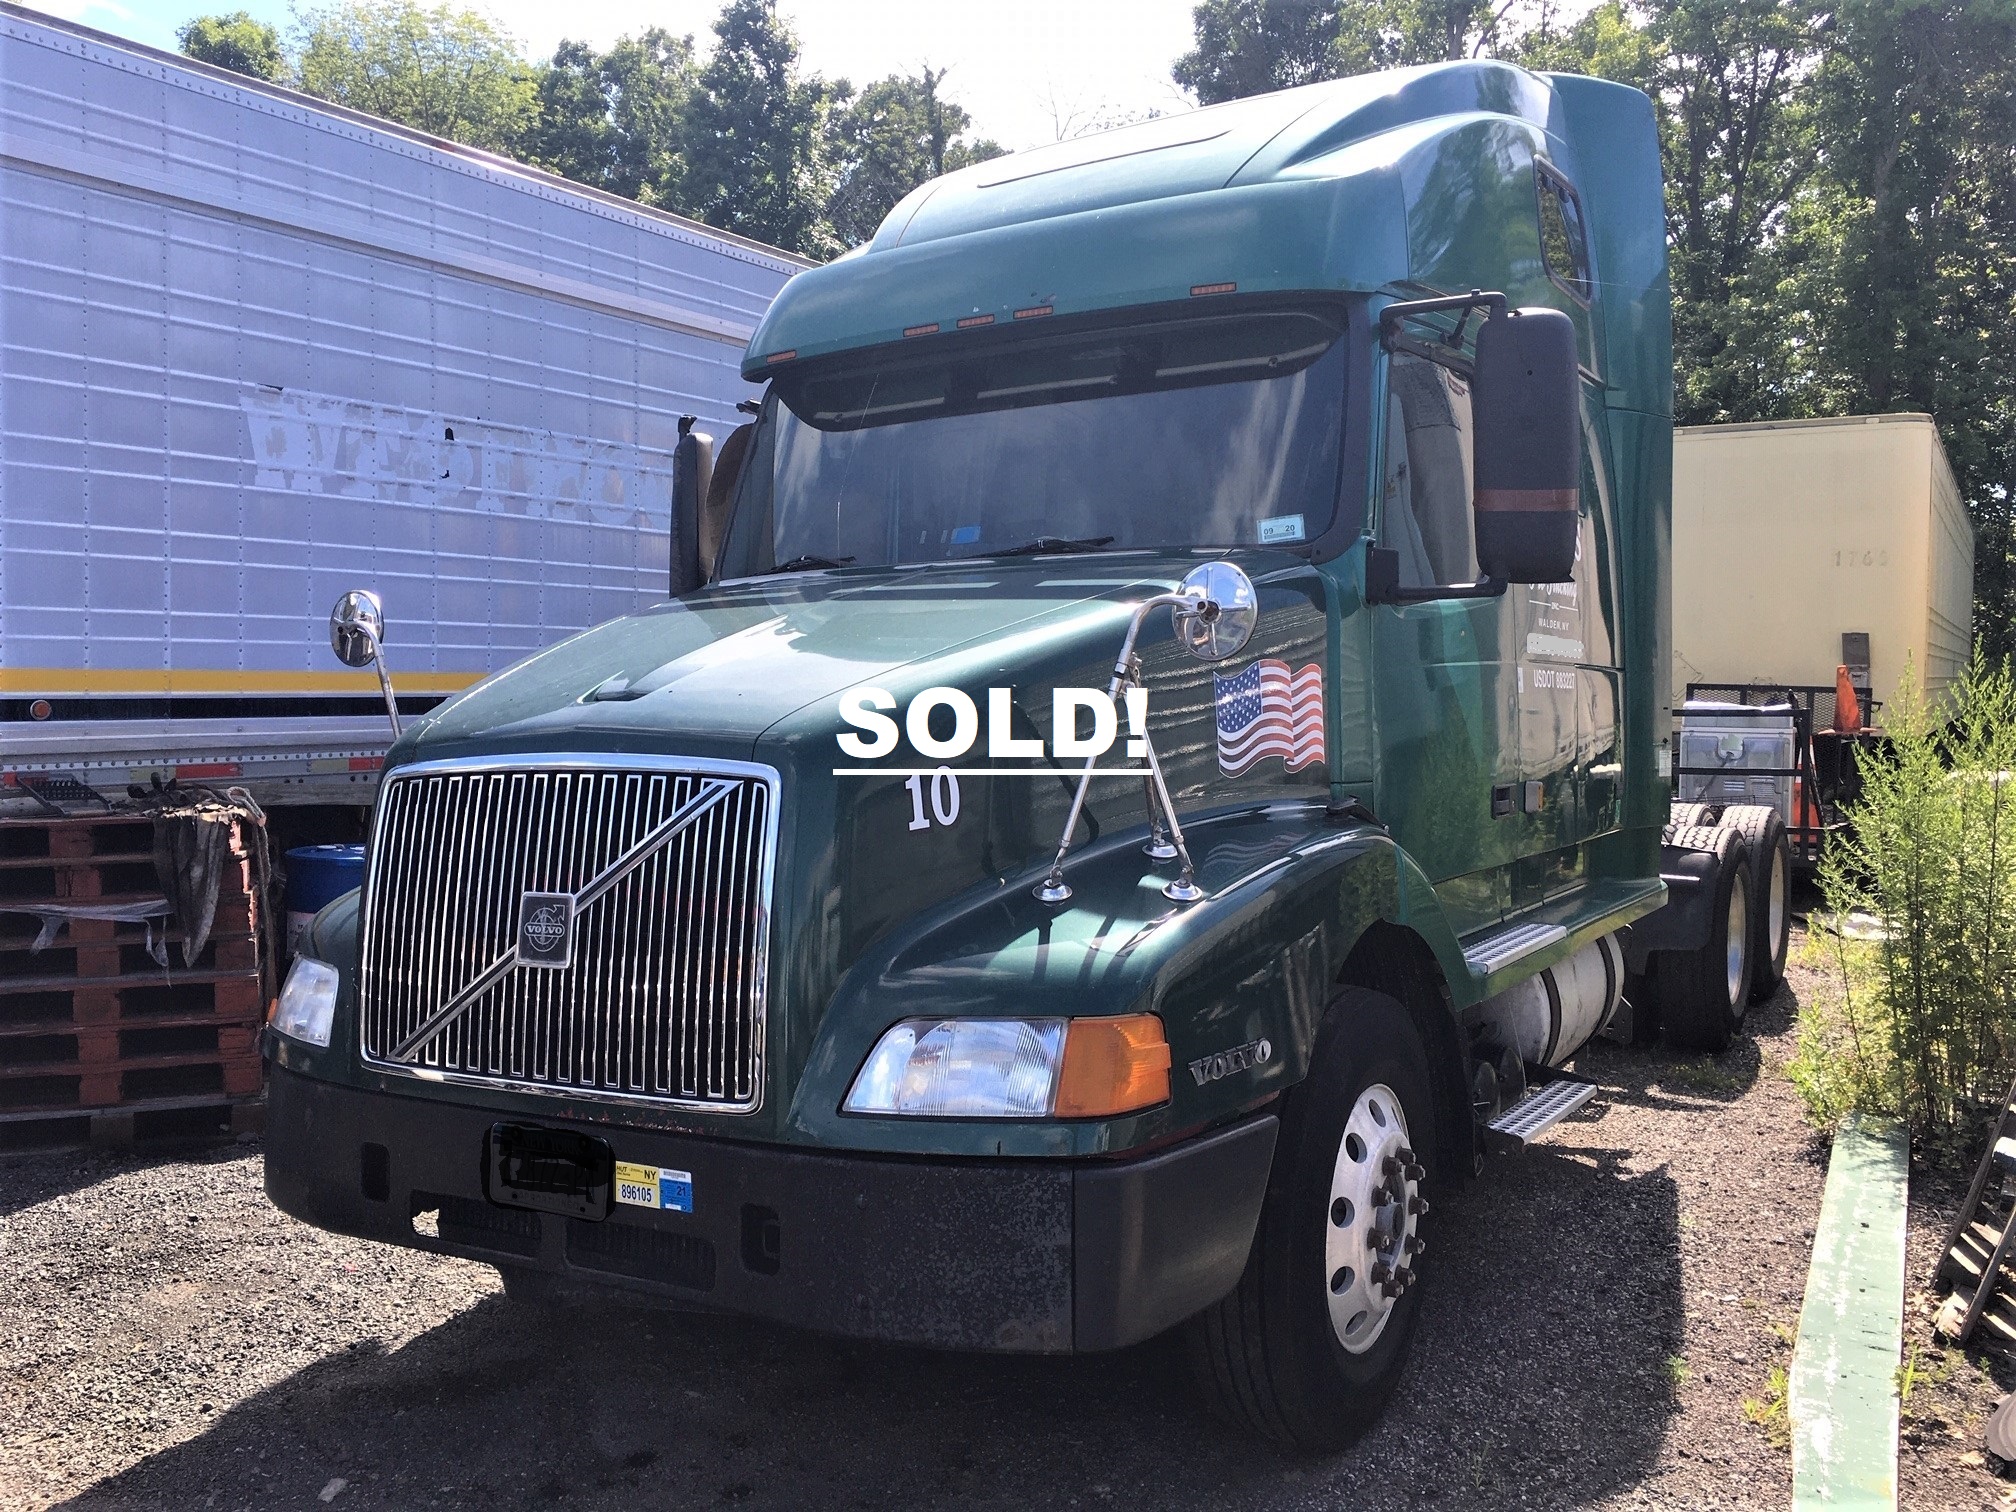 Volvo Semi Truck Tractor. 2000 year model with 900'000 miles. It has a Detroit Diesel S 60 engine with 430 horse power. The transmission is a Rockwell 10 speed. It has an engine break, power windows, power mirrors, Am/Fm/CD Radio, AC, Locking hubs and good tires.